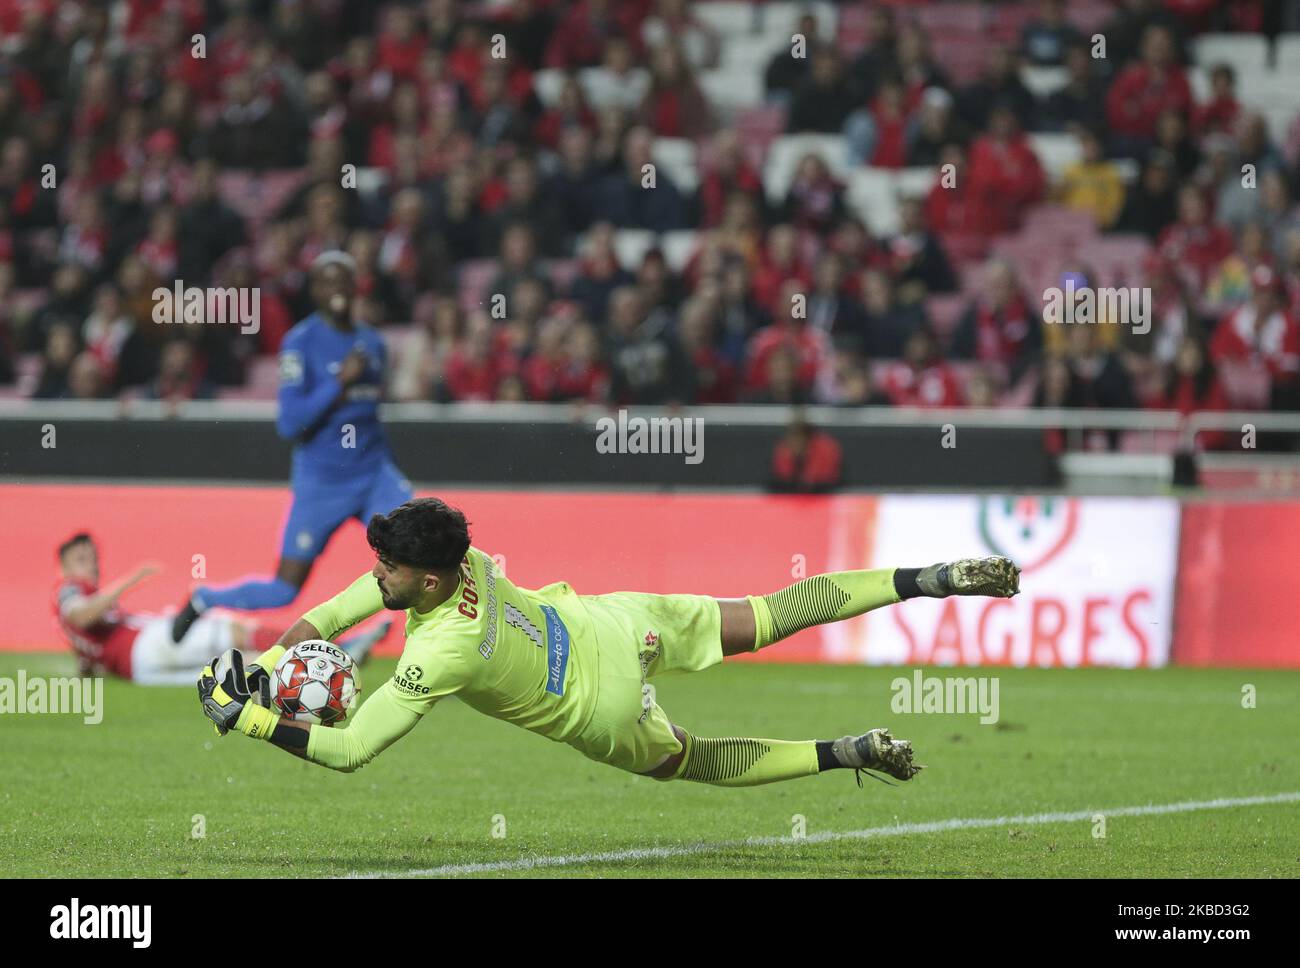 CS Maritimo Goalkeeper Amir Abedzadeh in action during the Premier League 2019/20 match between SL Benfica and CS Maritimo, at Luz Stadium in Lisbon on November 30, 2019. (Photo by Paulo Nascimento / DPI / NurPhoto) Stock Photo